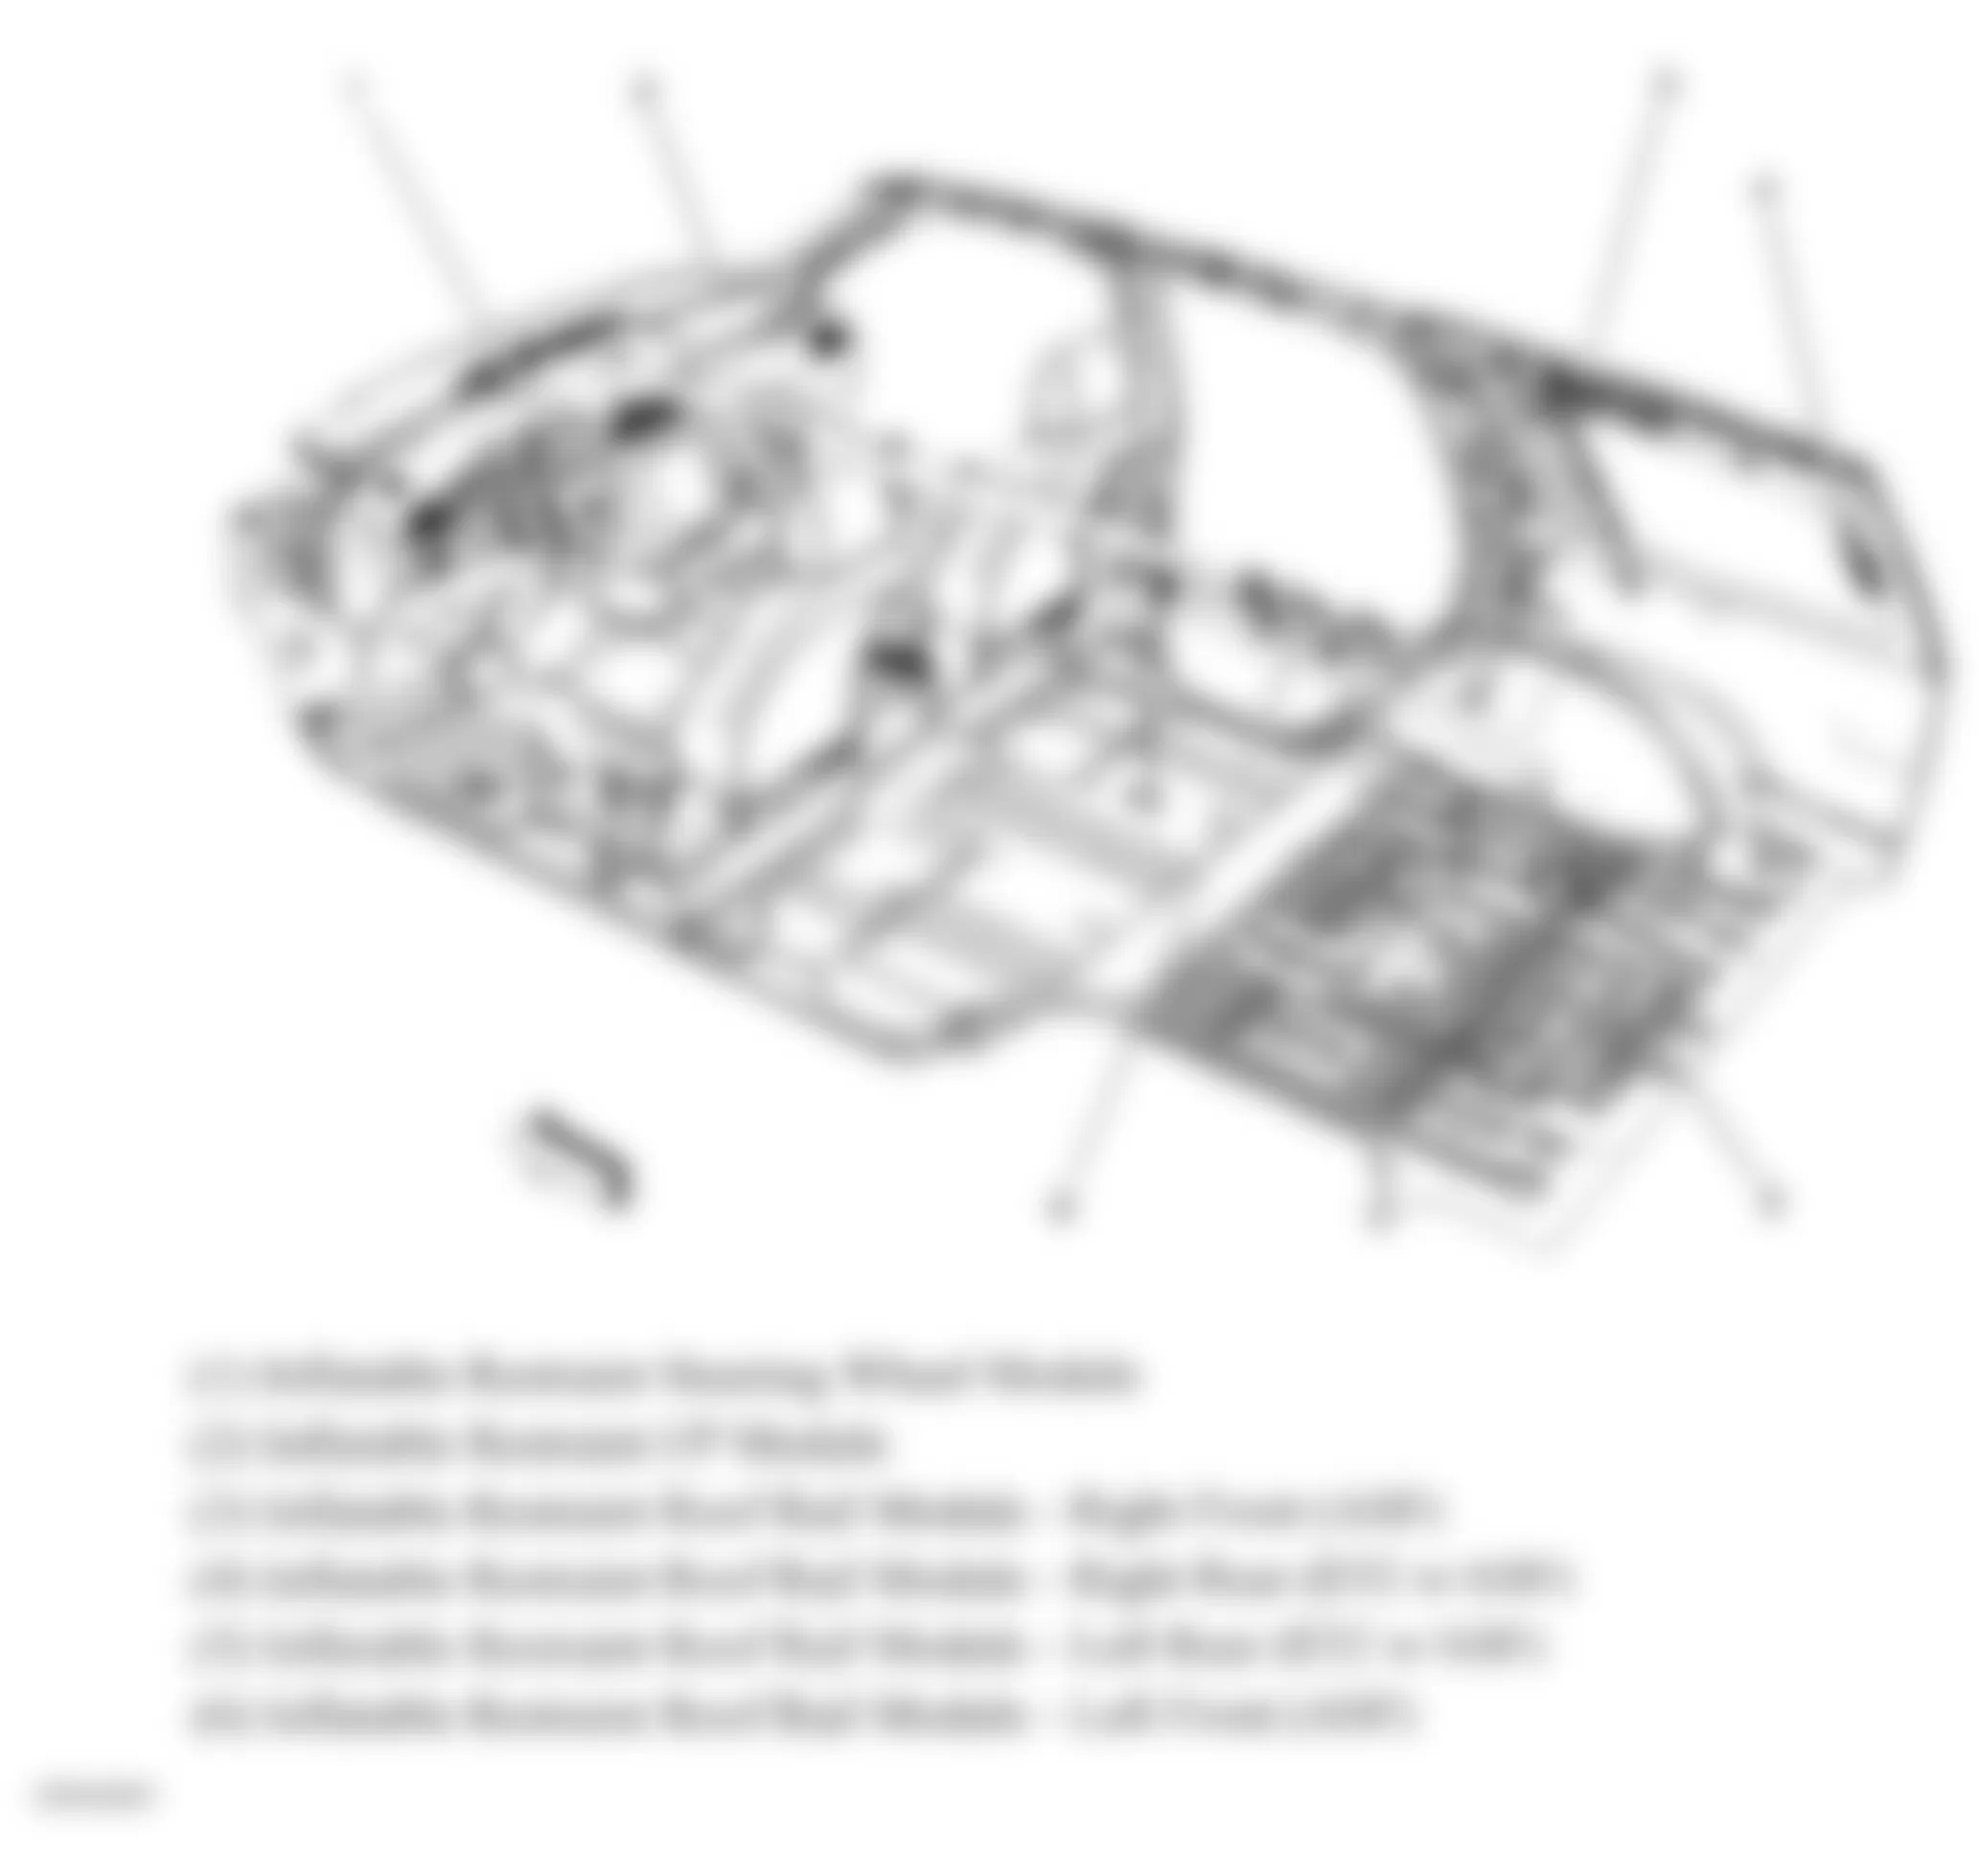 GMC Yukon XL C2500 2008 - Component Locations -  Vehicle Overview